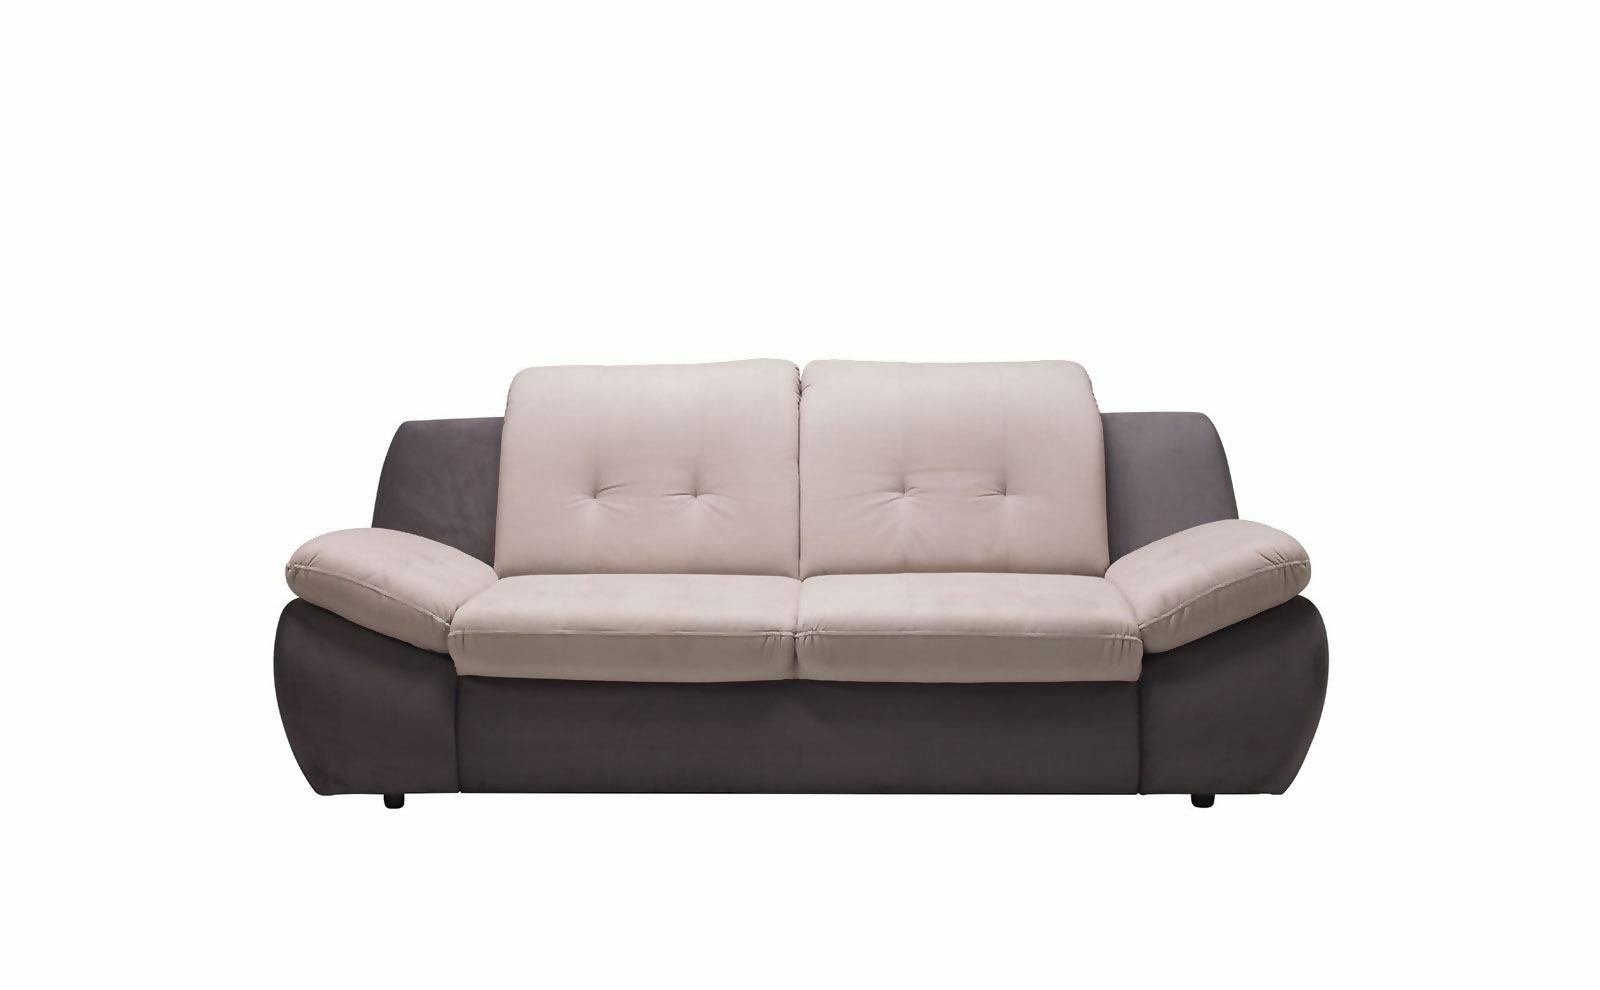 in Textil Designer Lounge Europe JVmoebel Made Relax Polster Sofa Sofas 3 Sofa Club Couch, Sitzer